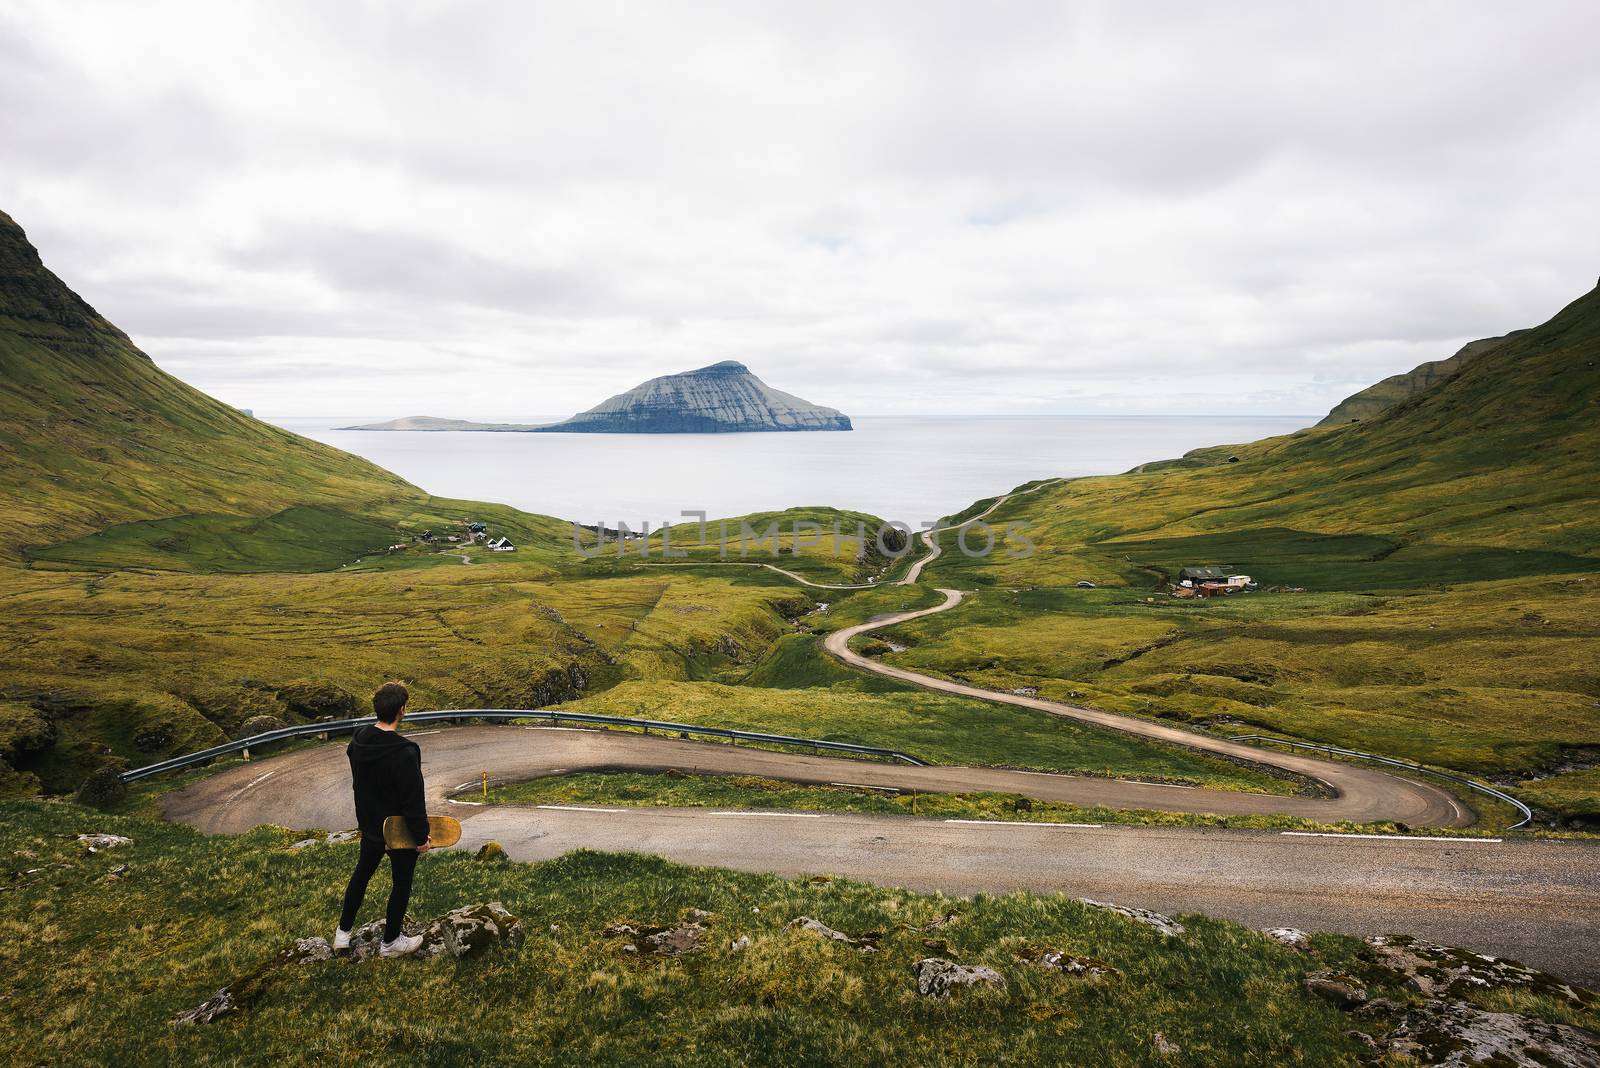 Young skater with his skateboard looks at a winding road on Faroe Islands surrounded by beatiful scenery and Atlantic Ocean in the background